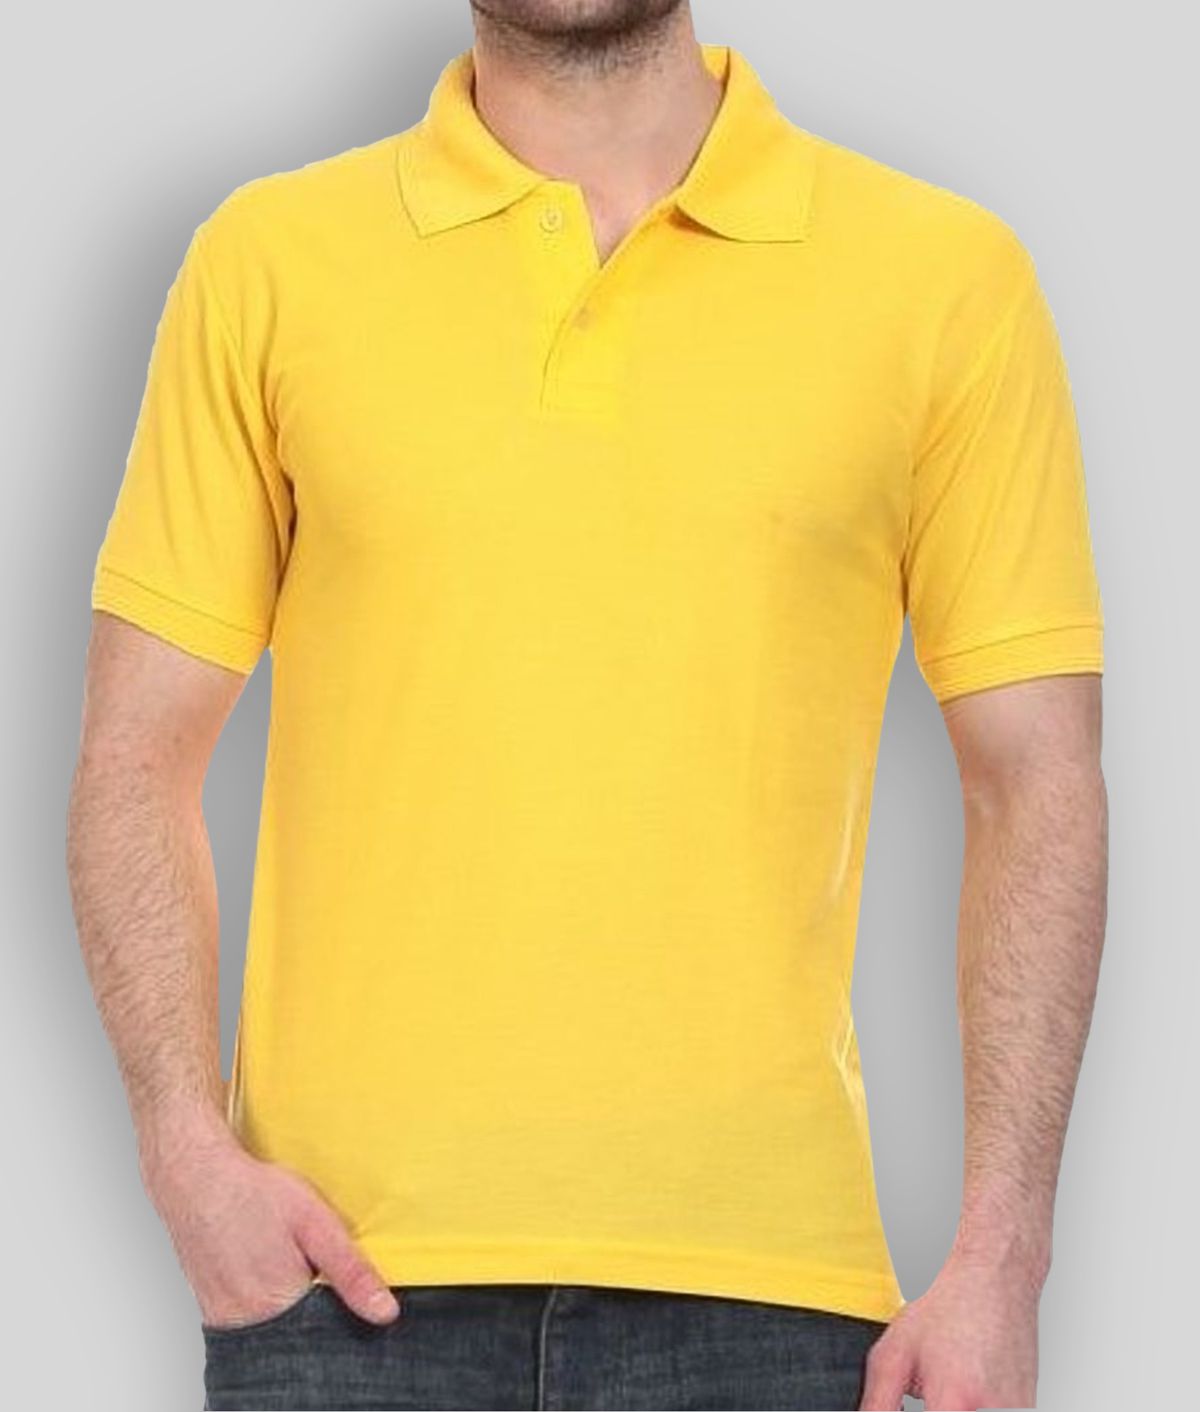     			FASHION365 - Yellow Cotton Blend Slim Fit Men's Polo T Shirt ( Pack of 1 )